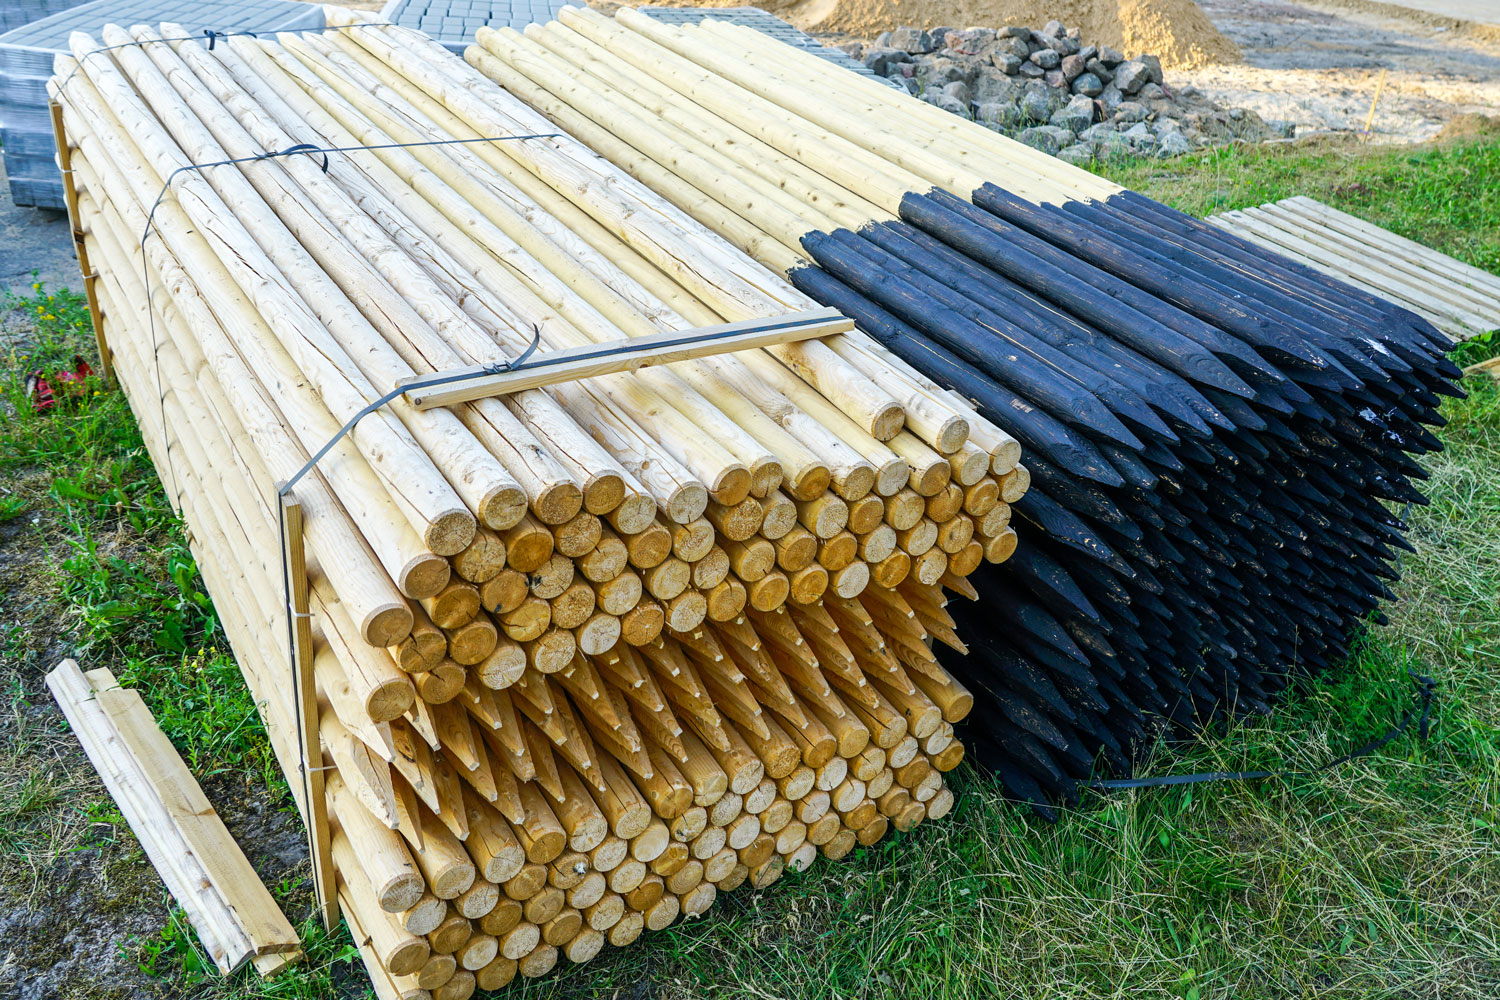 A huge bundle of fence posts for a house under construction